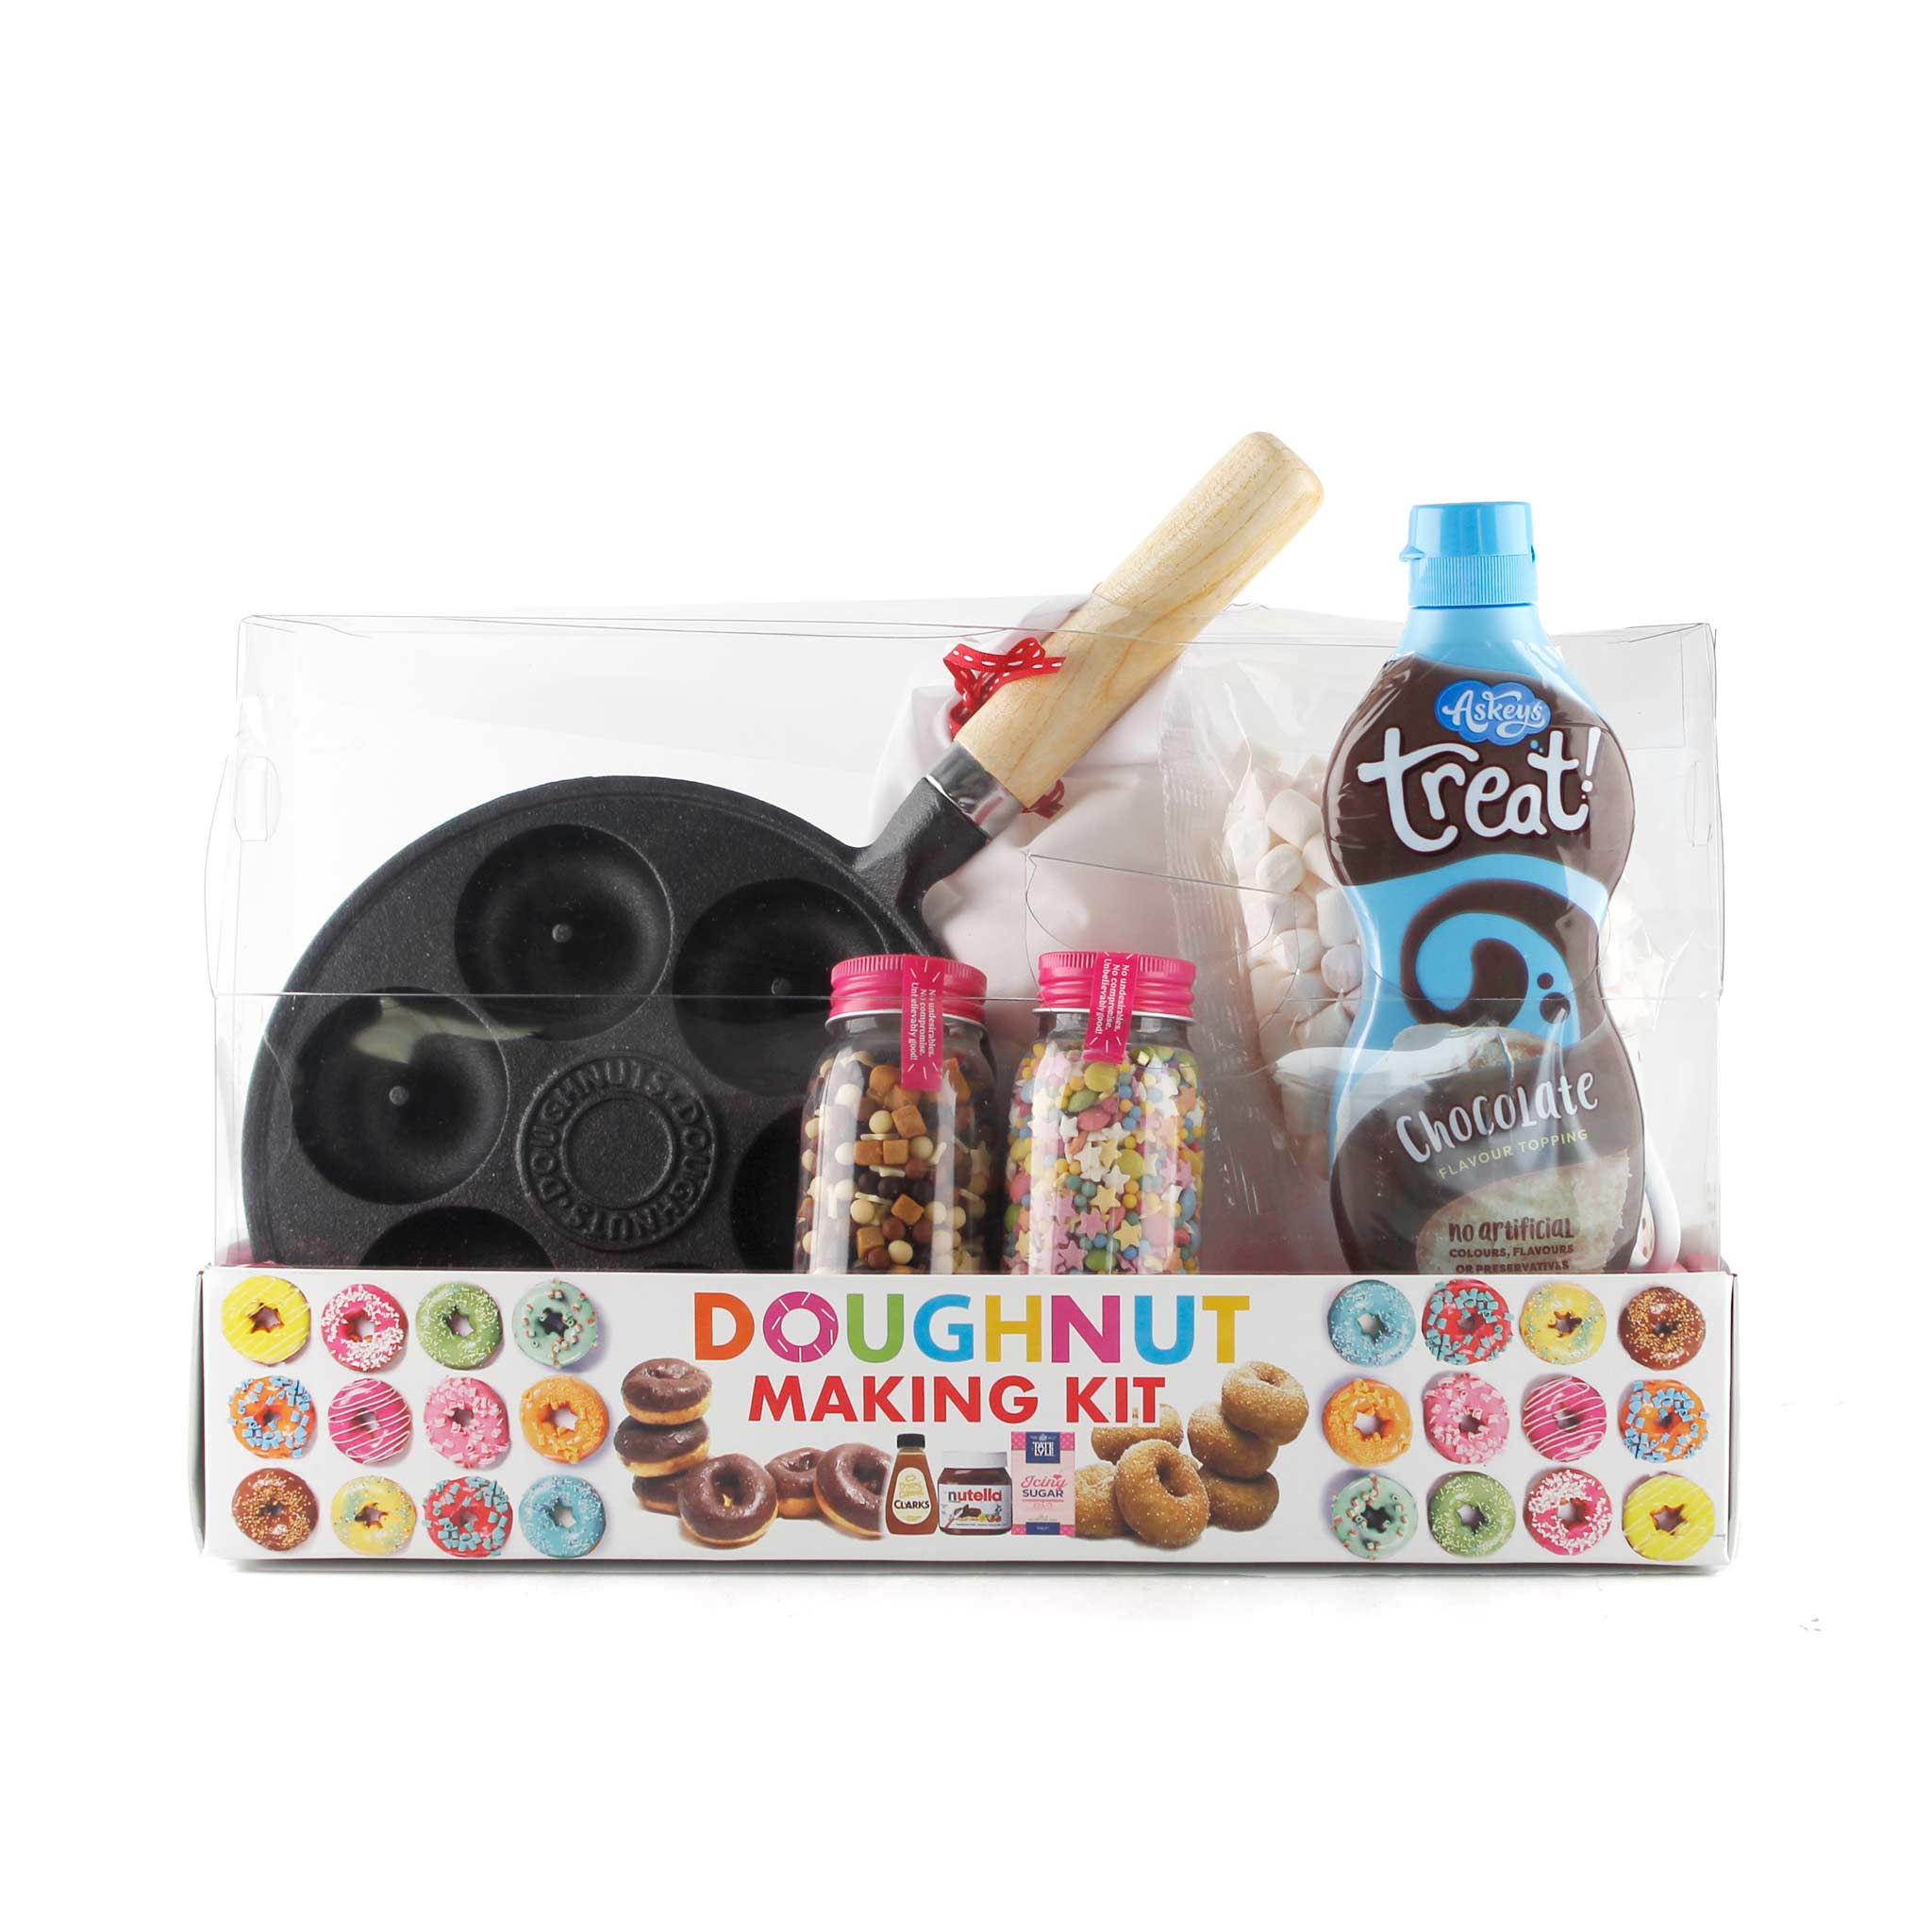 Donut making kit with cast iron pan by China Blue